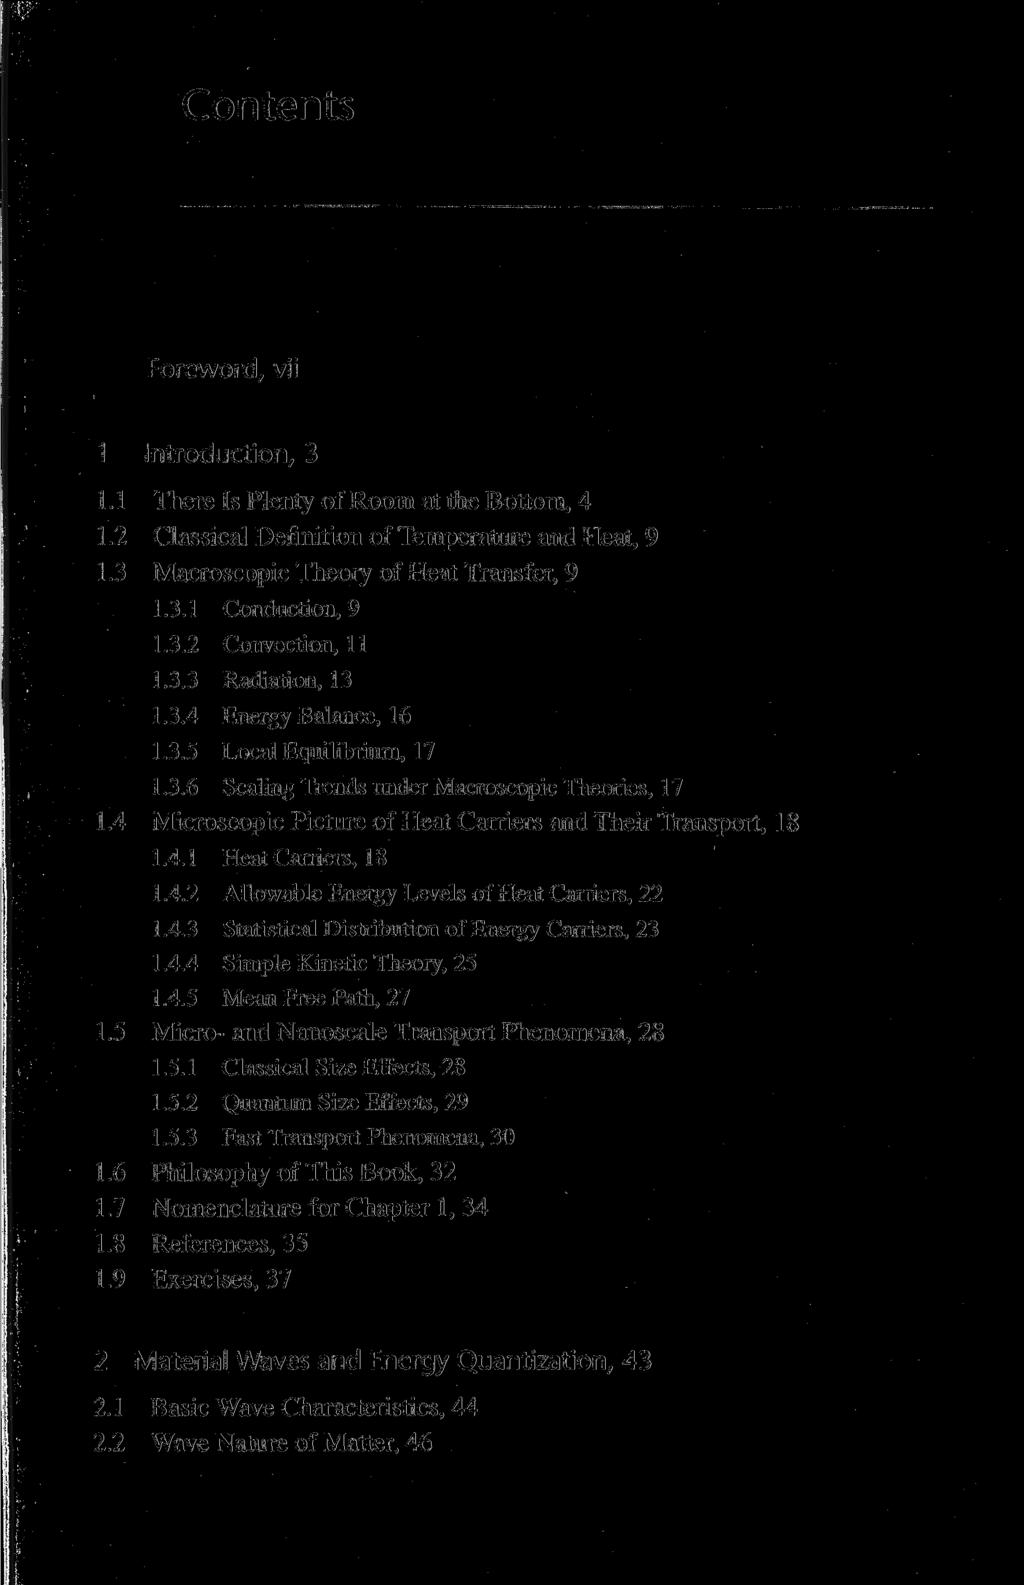 Contents Foreword, vii Introduction, 3 1 There Is Plenty of Room at the Bottom, 4 2 Classical Definition of Temperature and Heat, 9 3 Macroscopic Theory of Heat Transfer, 9 1.3.1 Conduction, 9 1.3.2 Convection, 11 1.